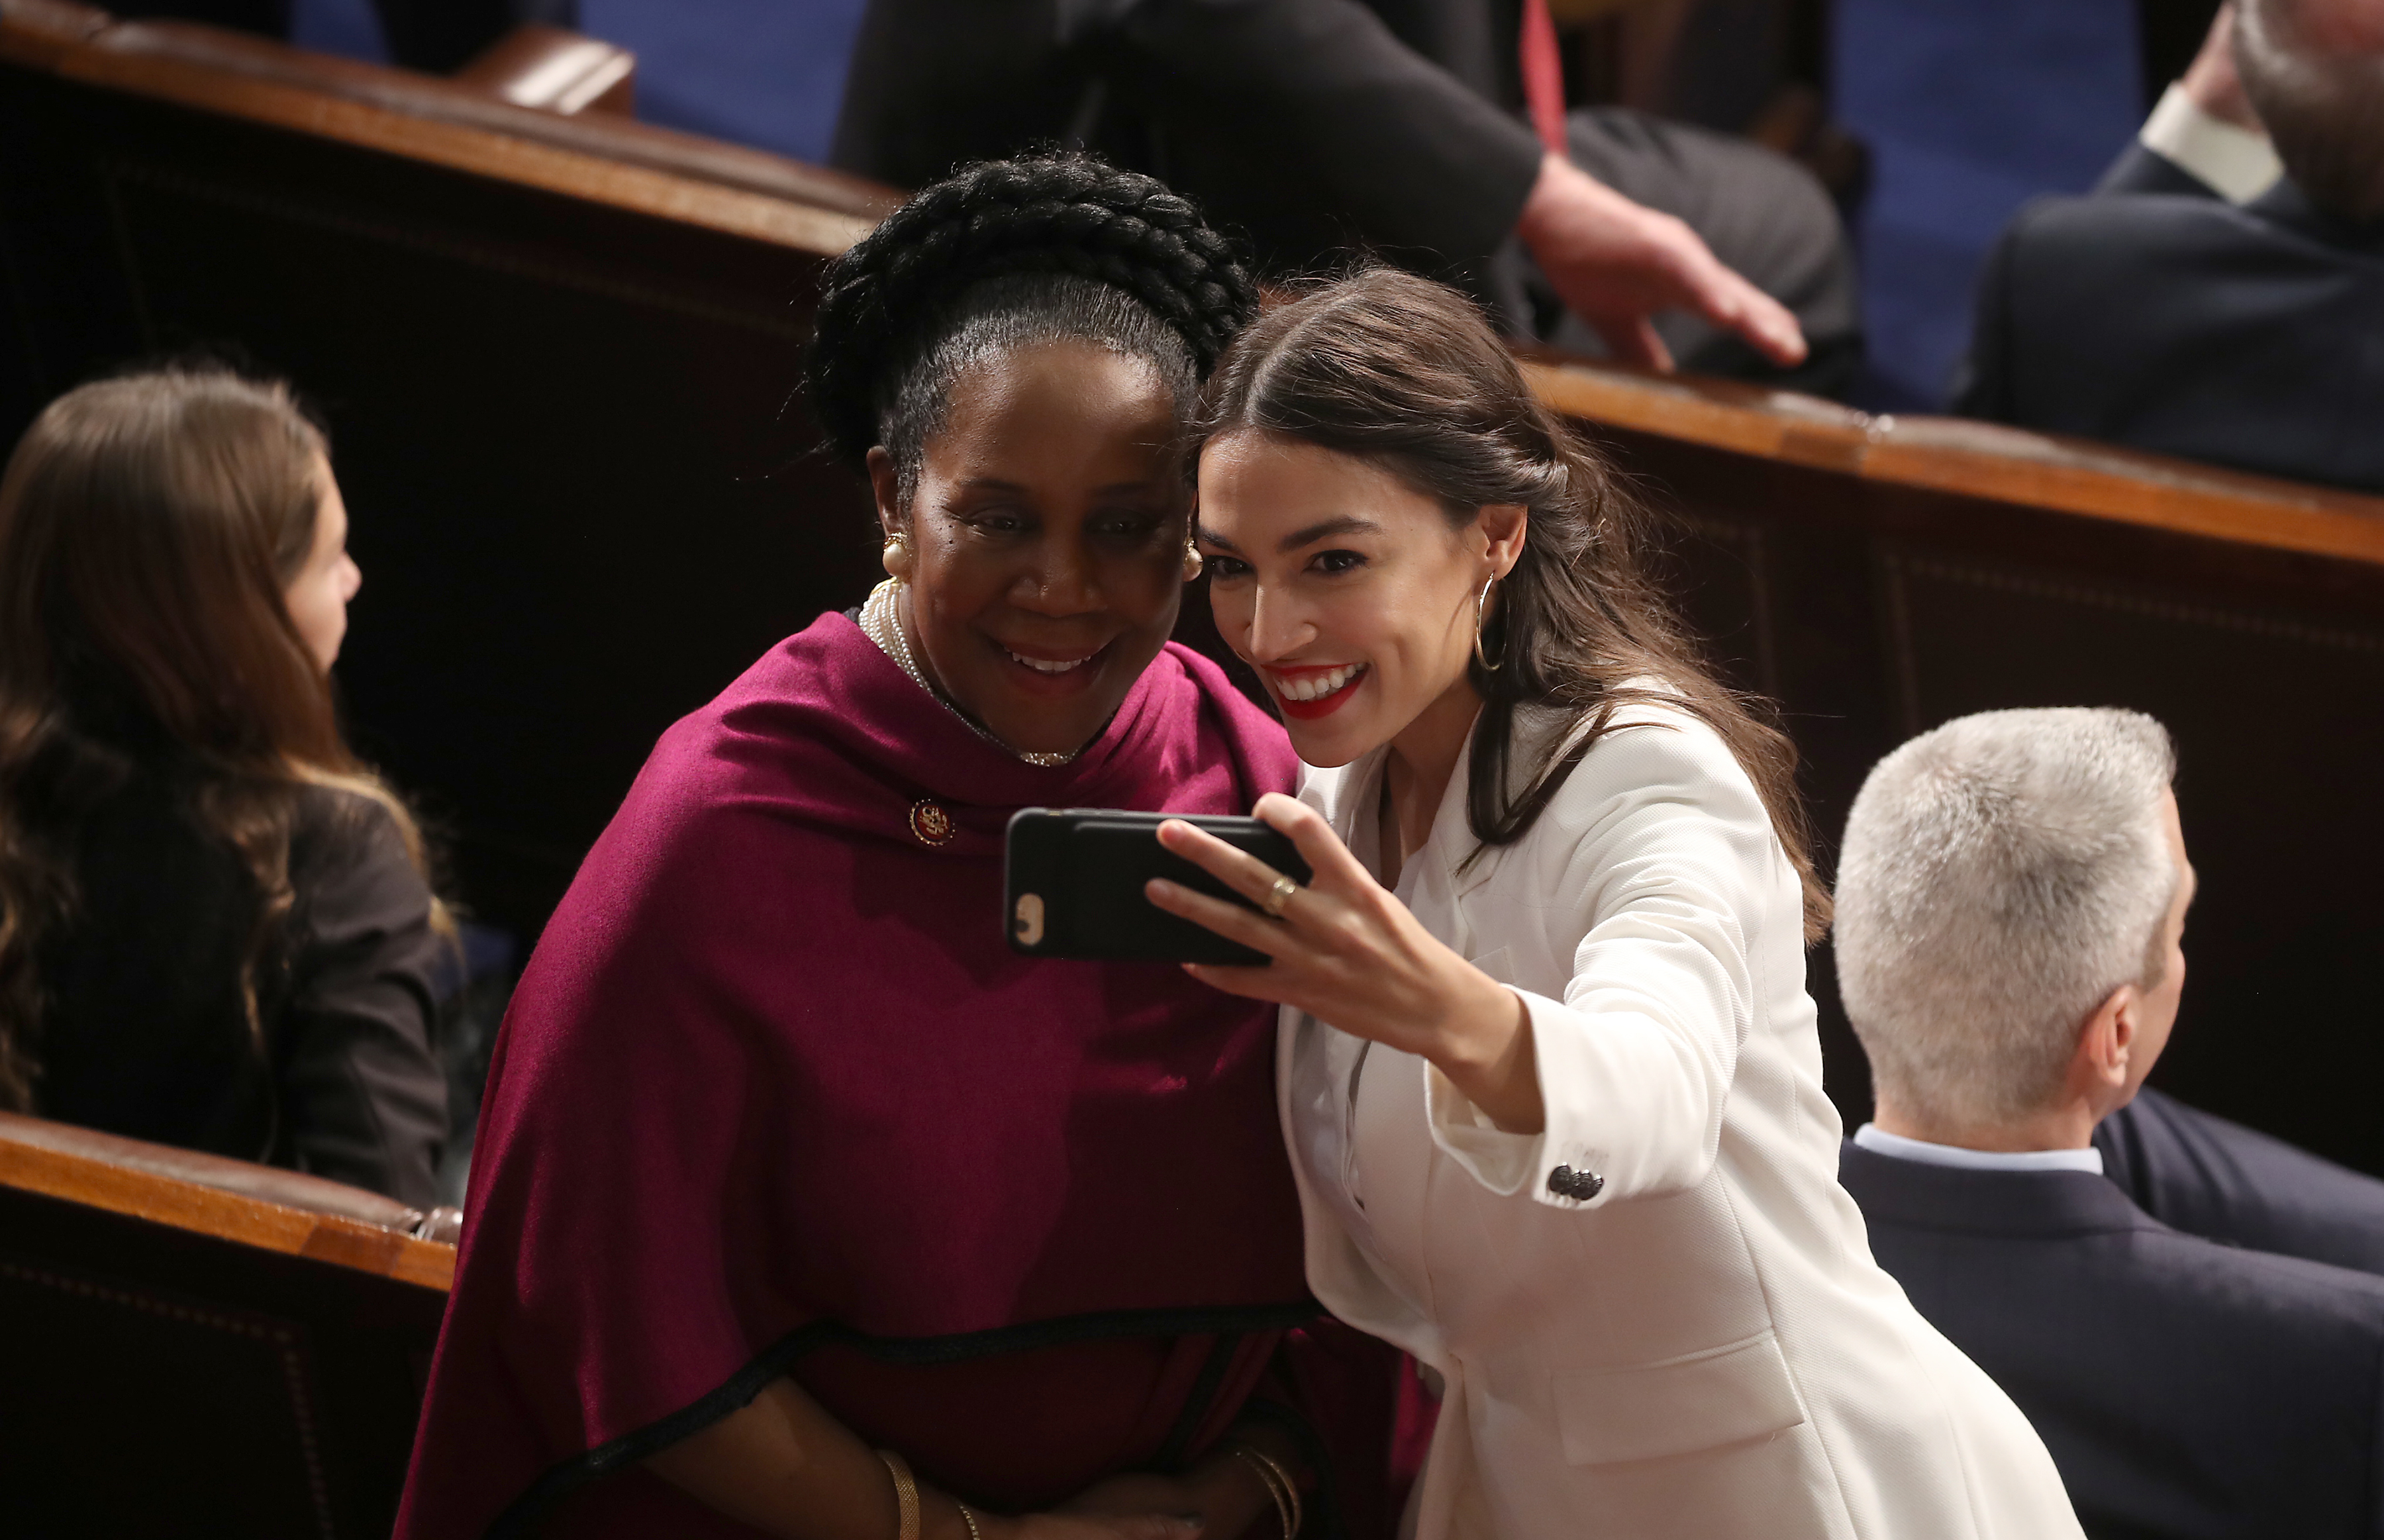 Rep. Alexandria Ocasio-Cortez (D-NY) takes a photo with Rep. Sheila Jackson-Lee (D-TX) prior to the first session of the 116th Congress. (Mark Wilson/Getty Images)